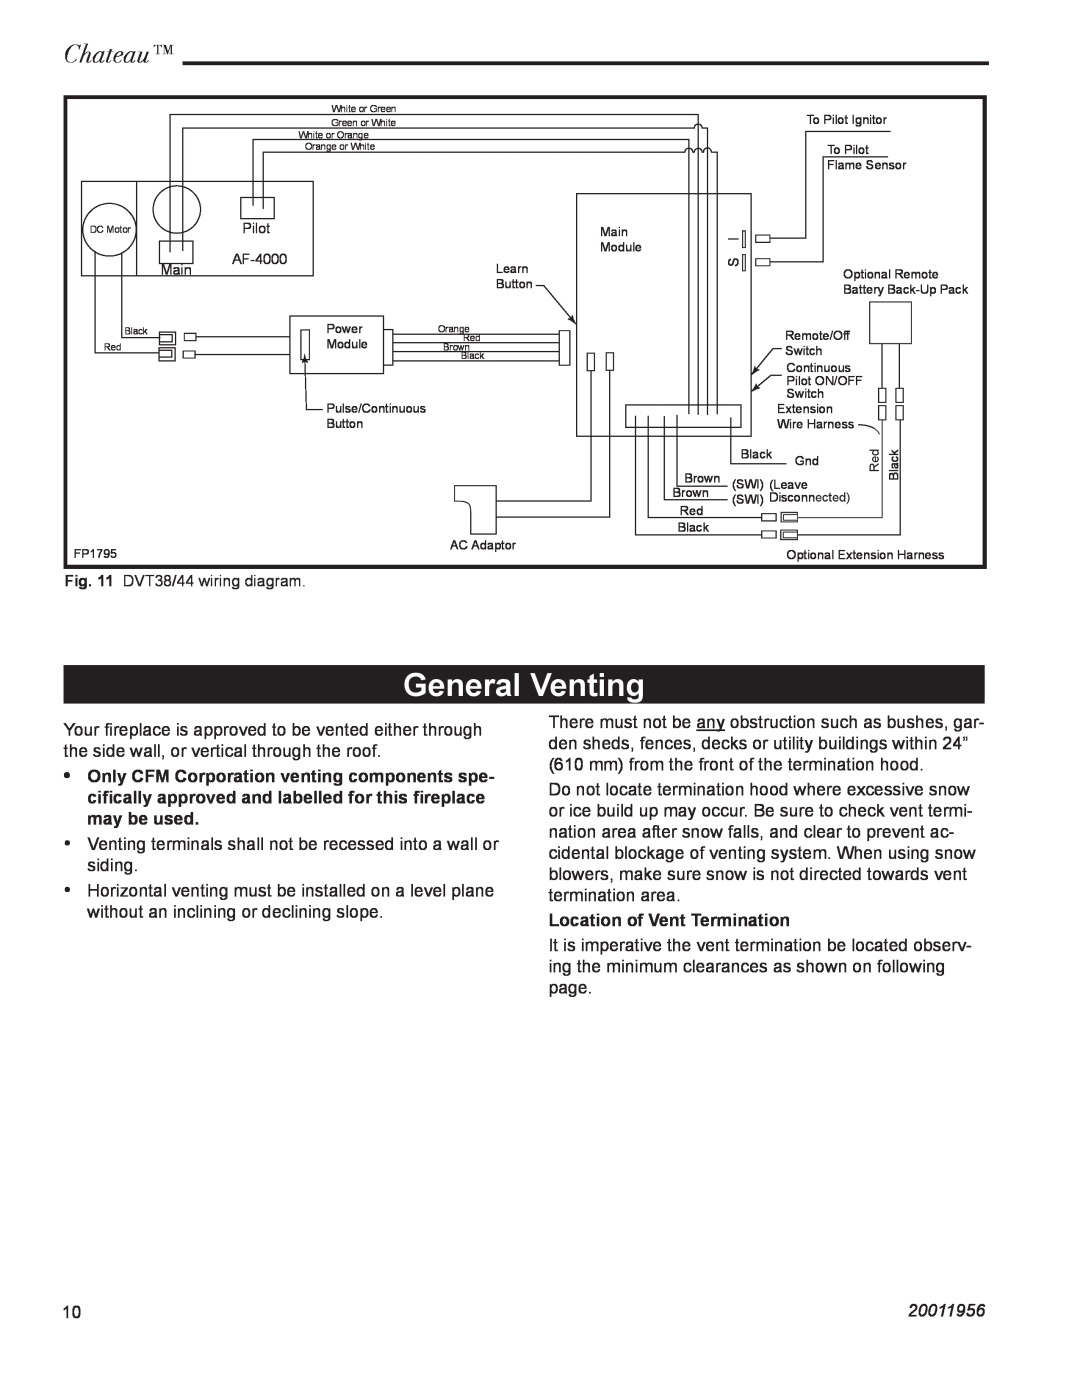 Vermont Casting DVT44 installation instructions General Venting, Chateau, Location of Vent Termination, 20011956 